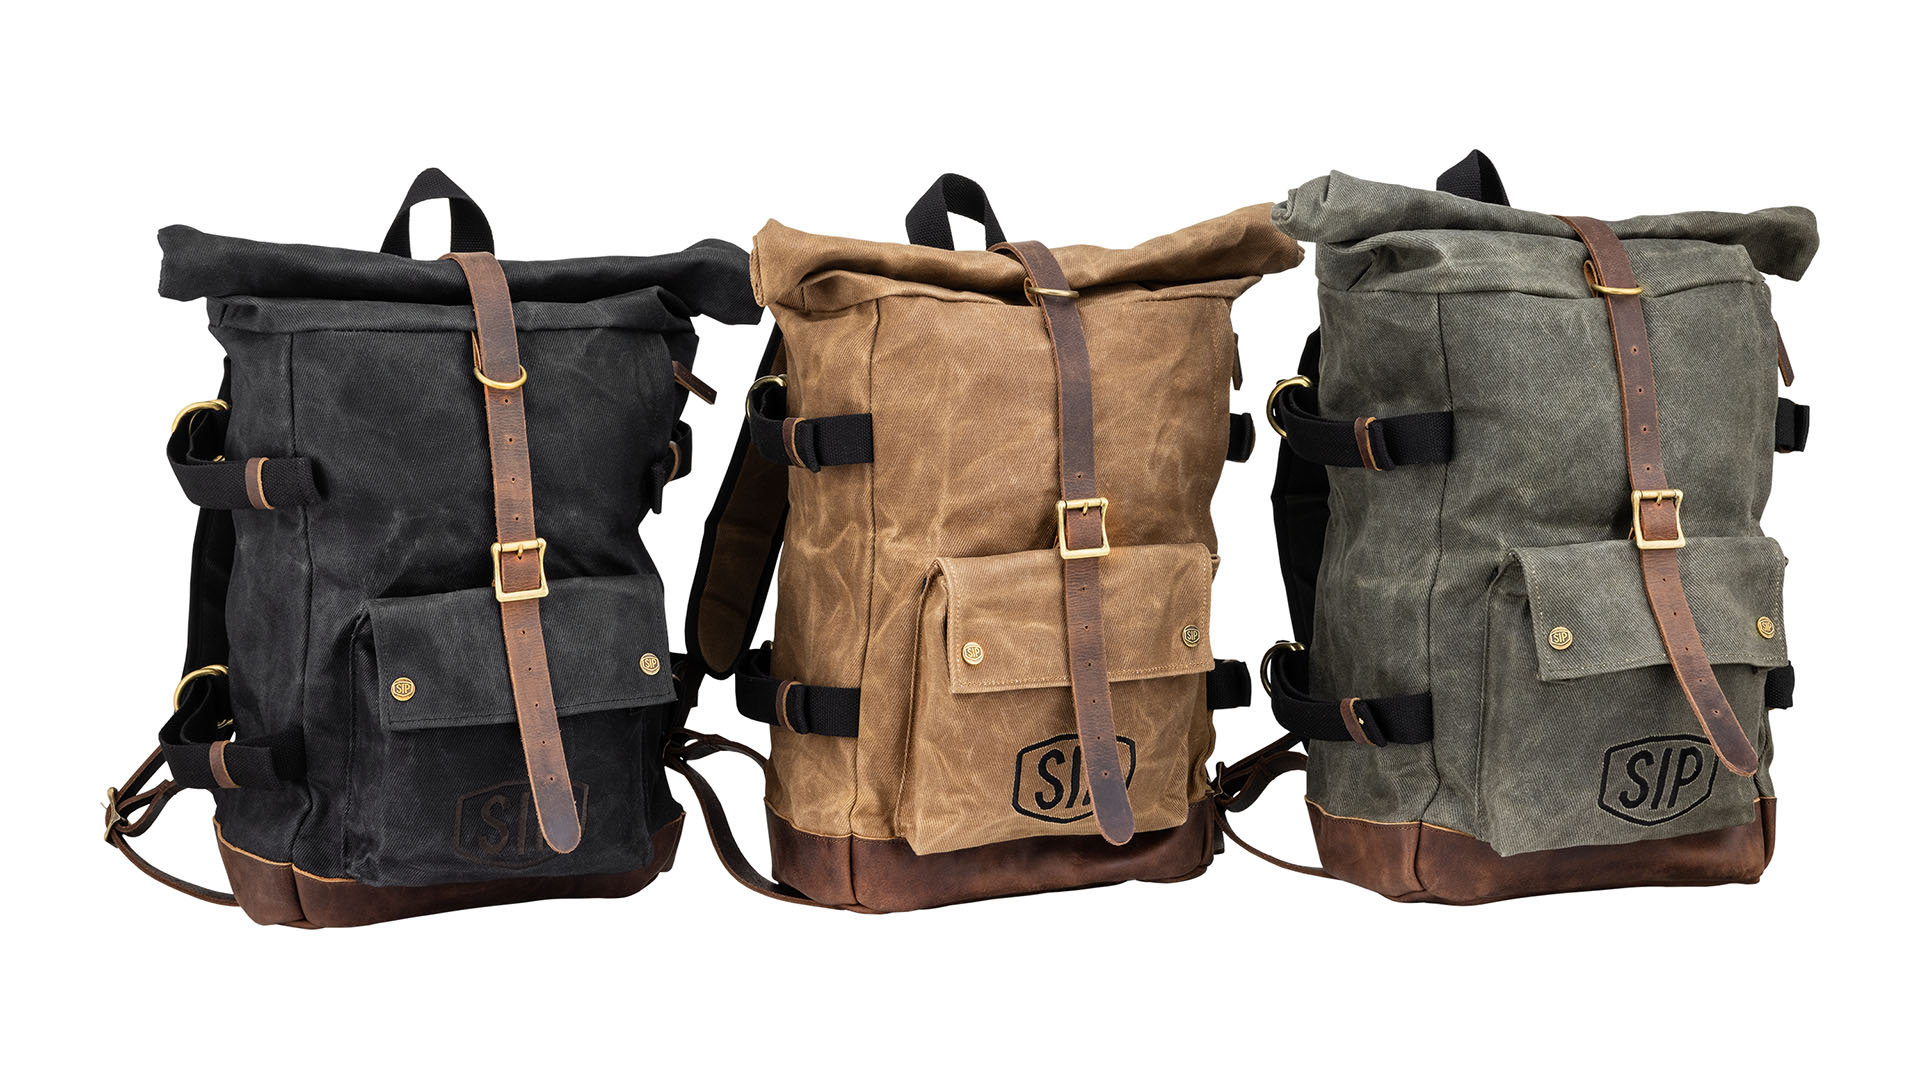 The perfect companion for adventures: the SIP Destination backpack